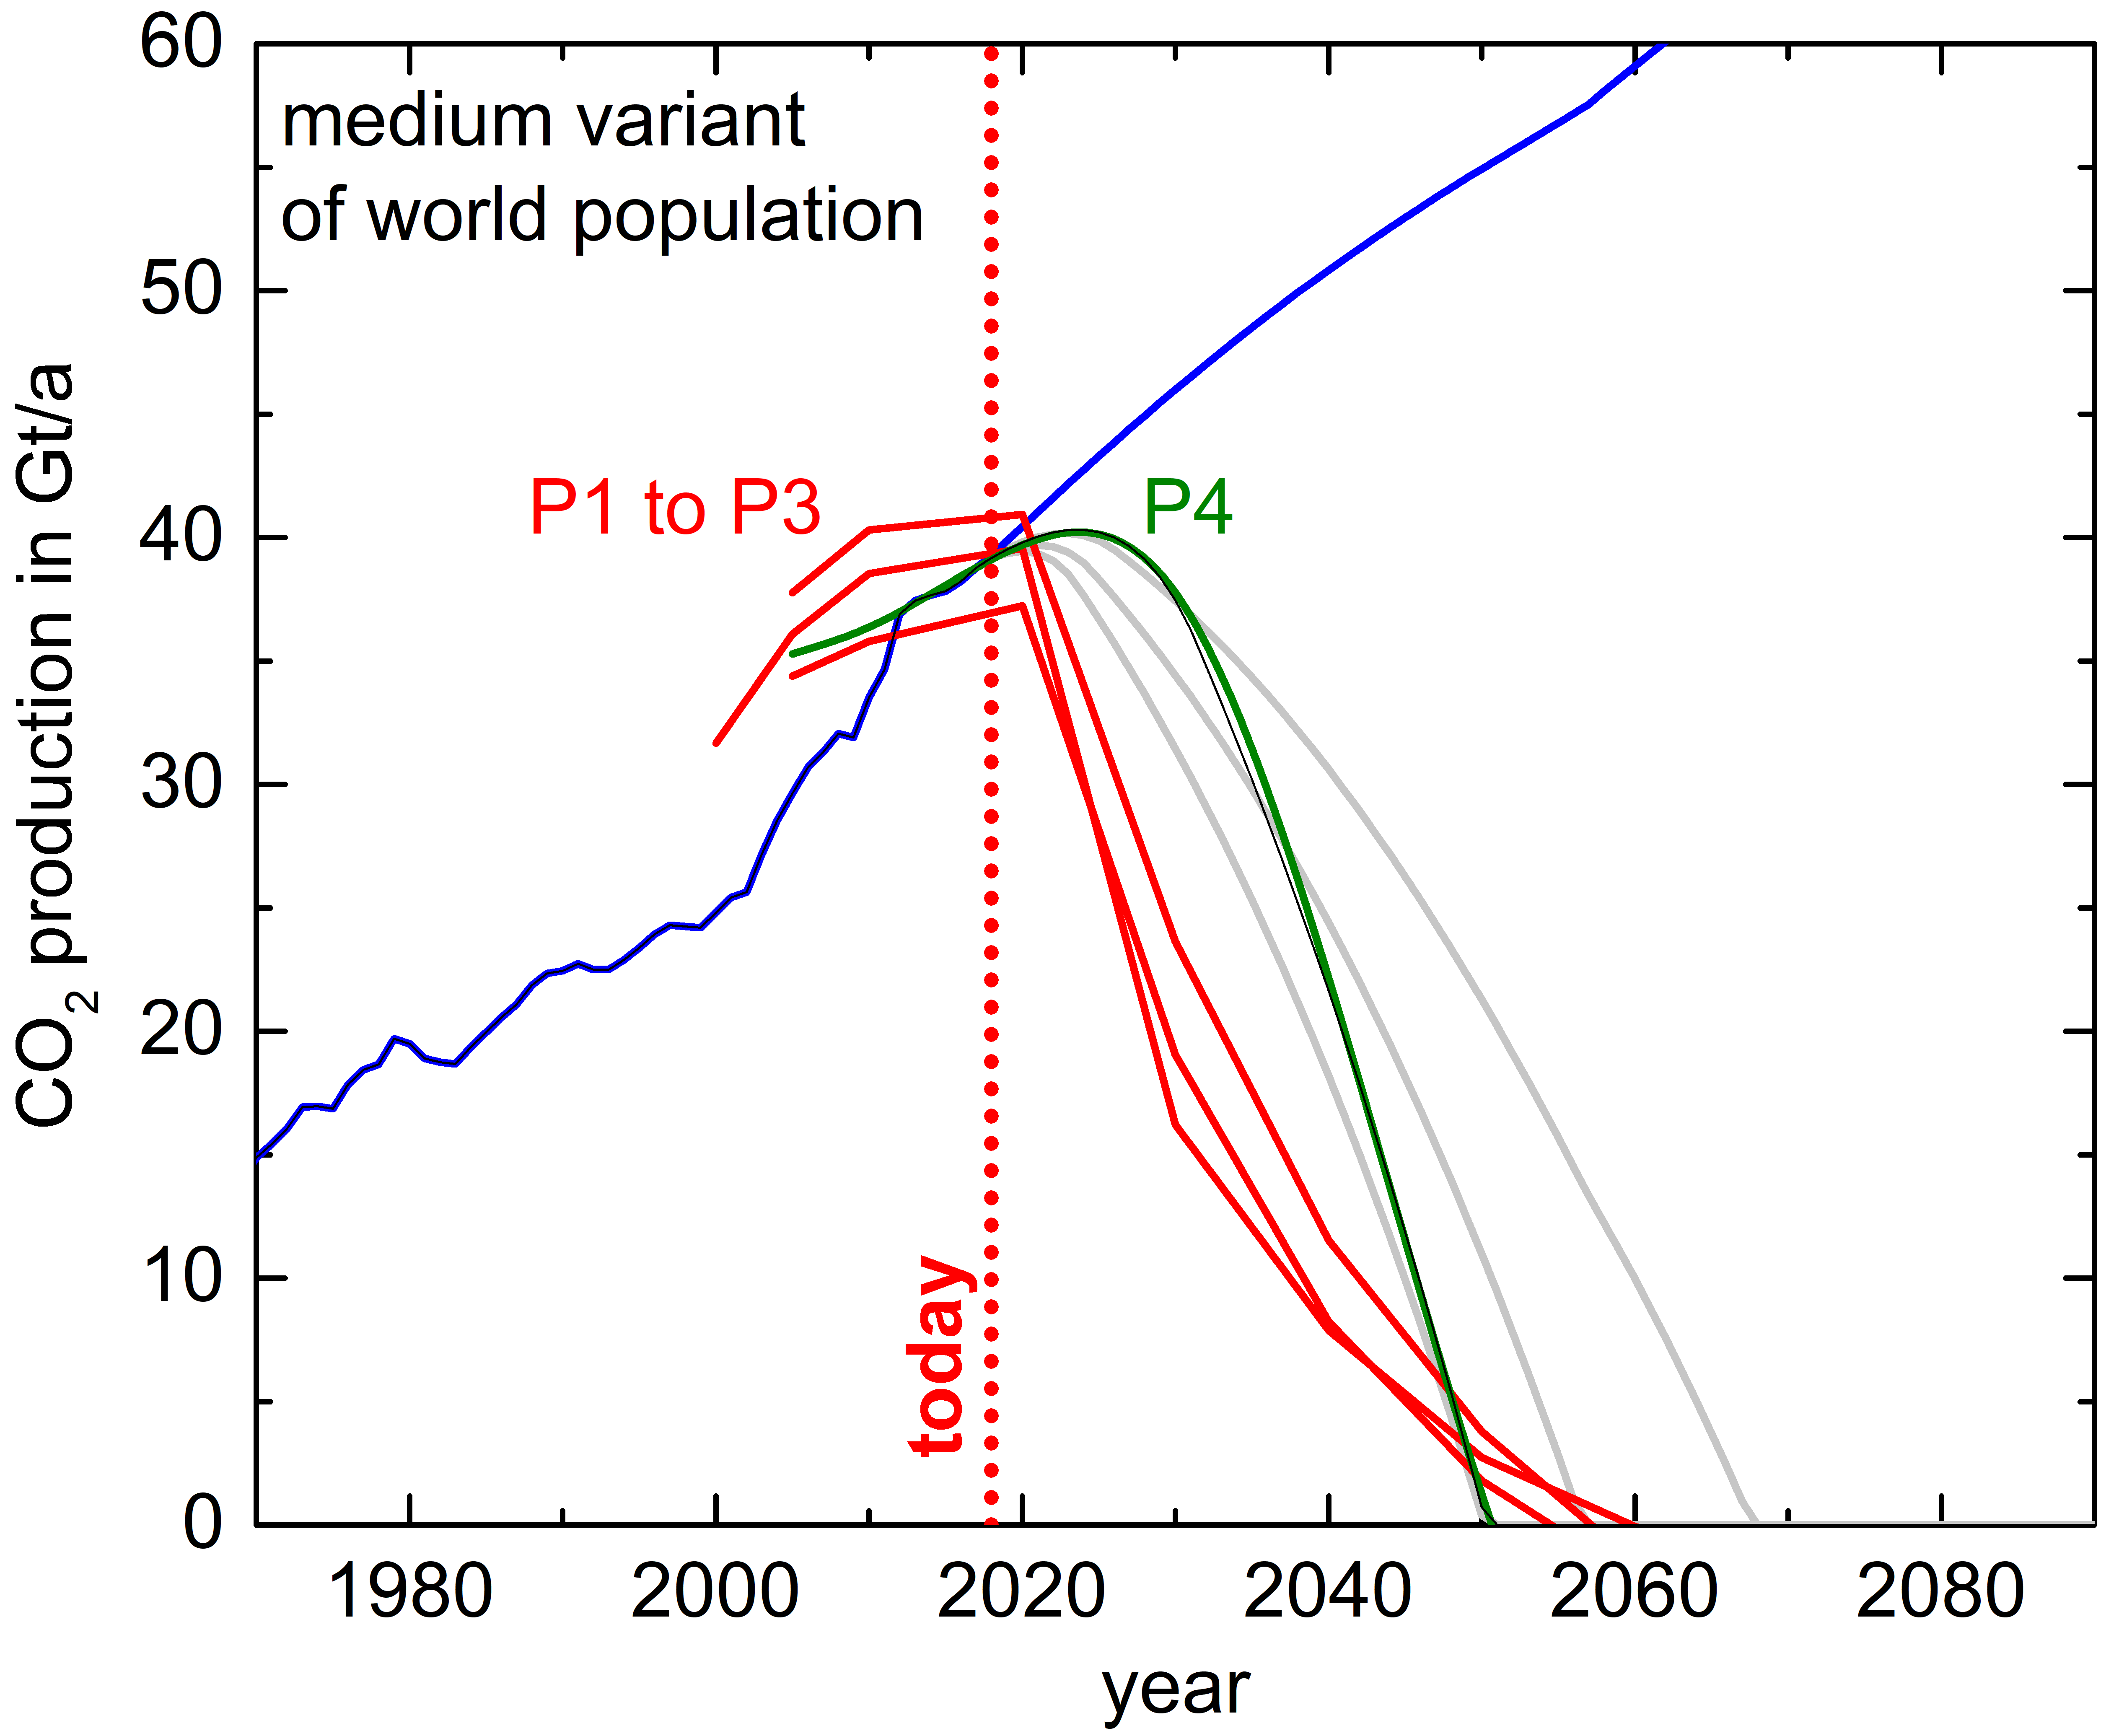 Energy scenarios of the Intergovernmental Panel on Climate Change's special report on the 1.5°C climate change in comparison with its own scenarios 